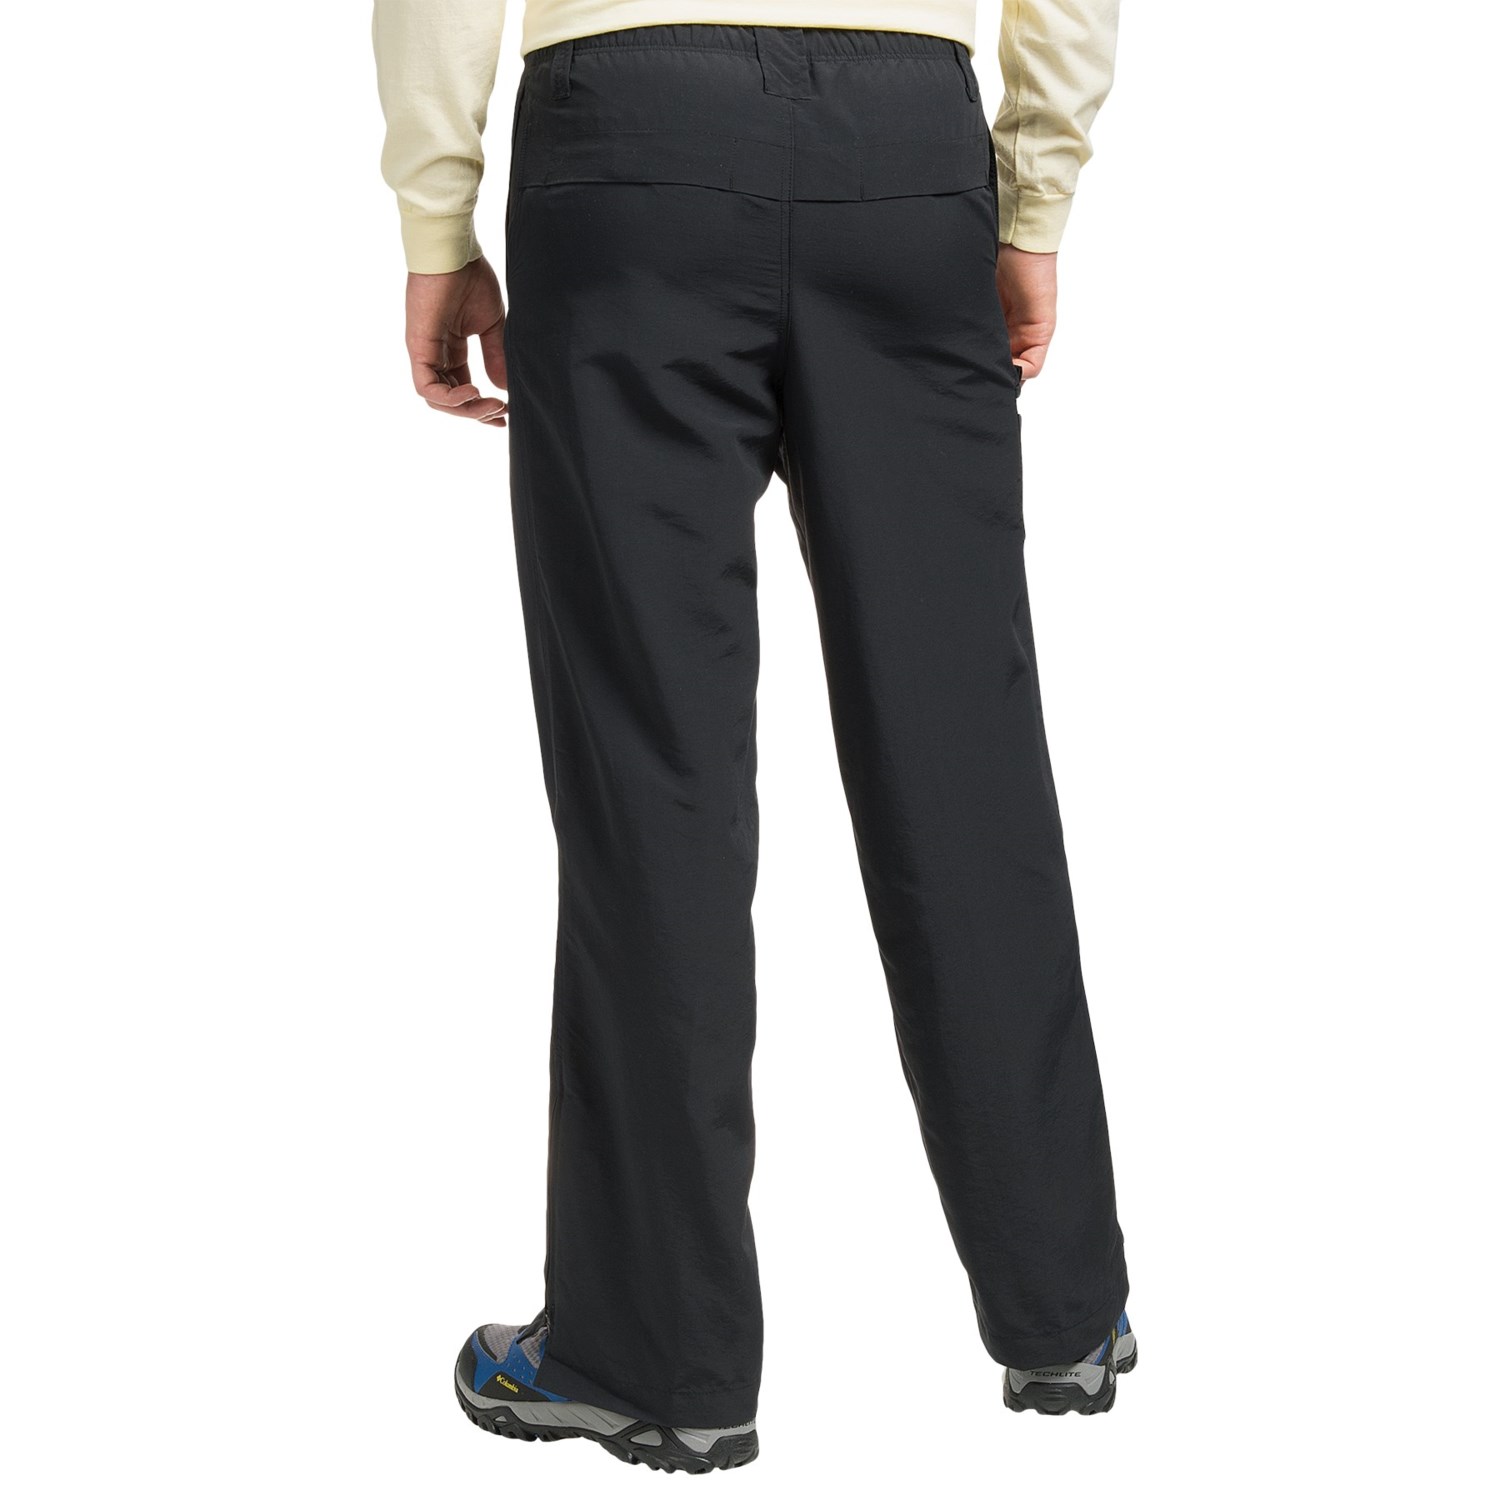 AFTCO Pullover Fishing Pants (For Men) - Save 36%